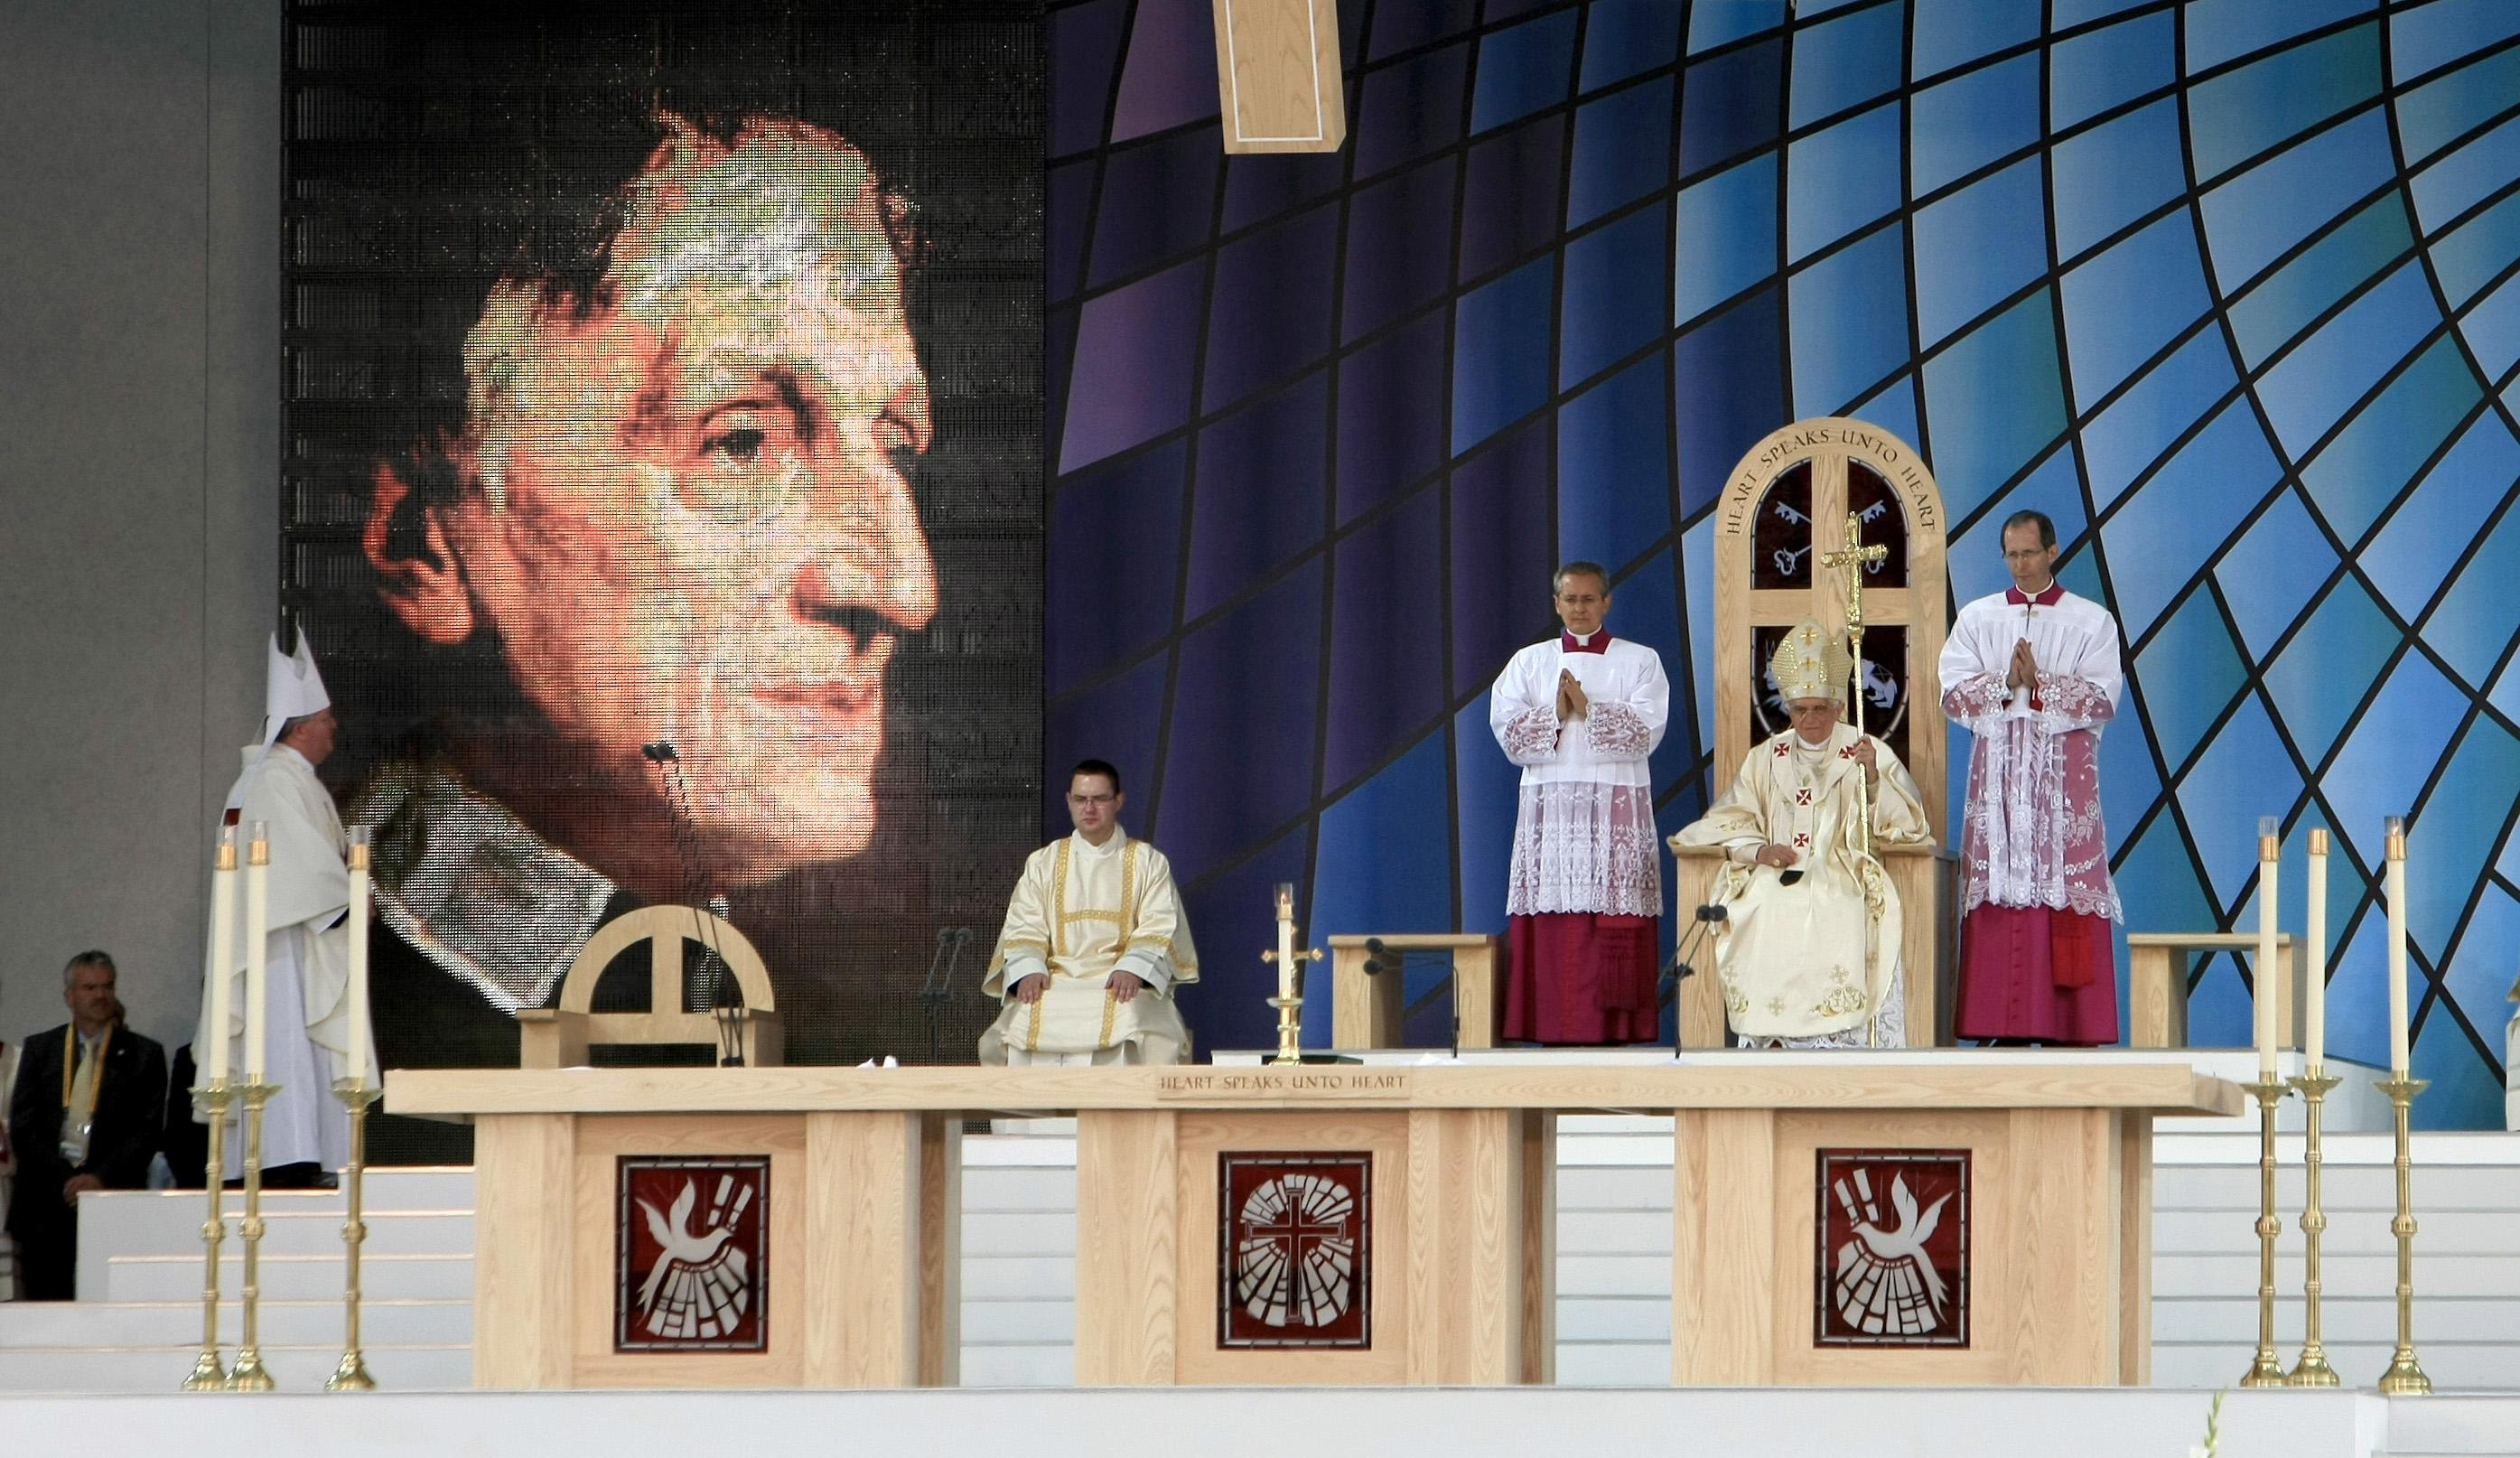 A tribute to Cardinal Newman on the occasion of his canonisation